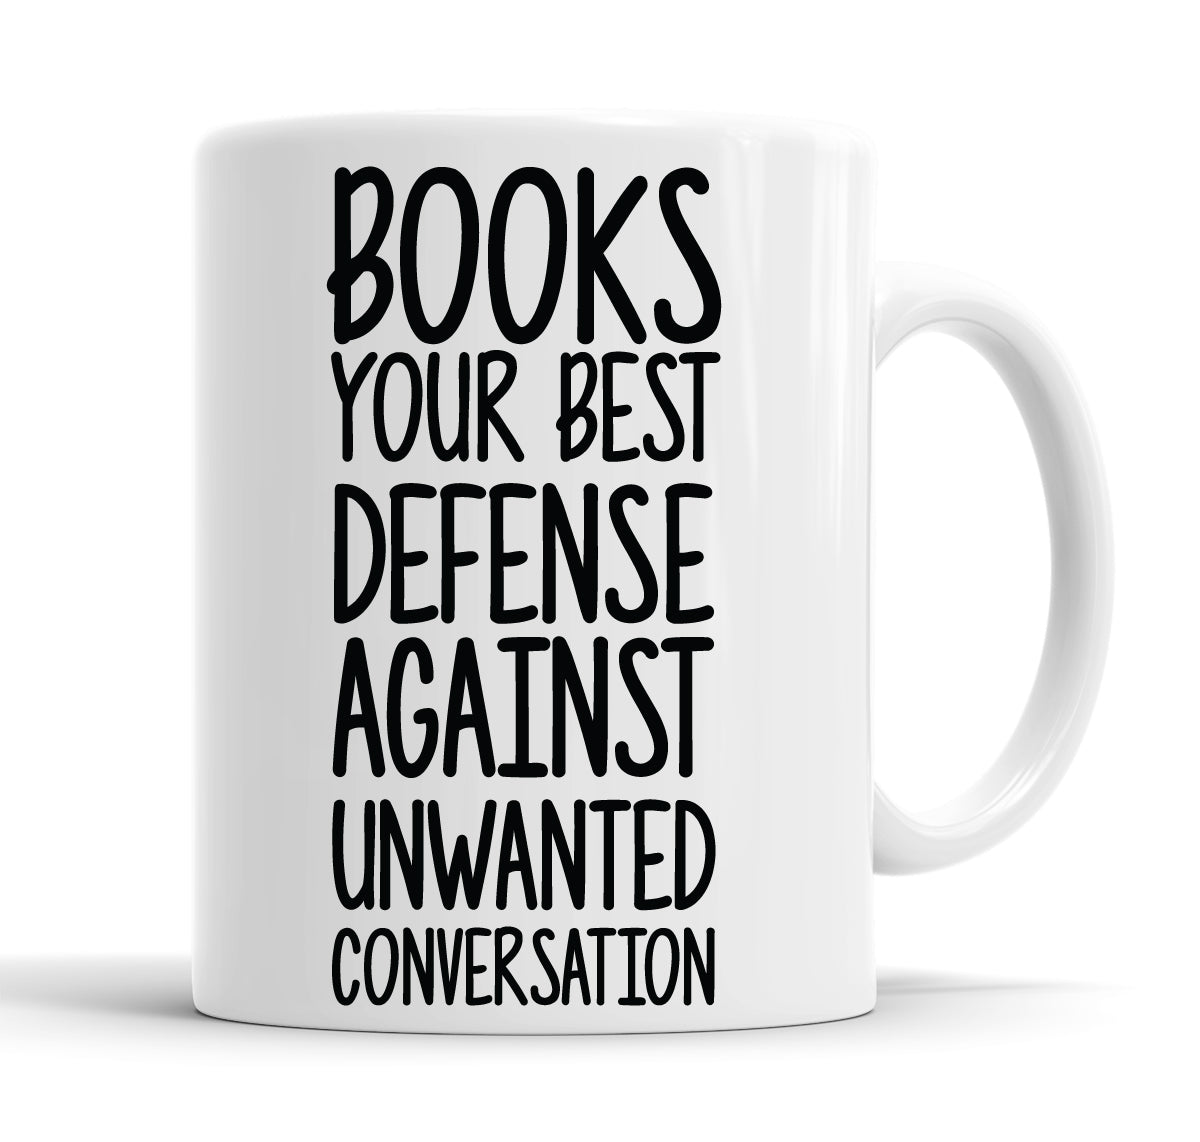 Books, Your Best Defense Against Unwanted Conversation Funny Slogan Mug Tea Cup Coffee